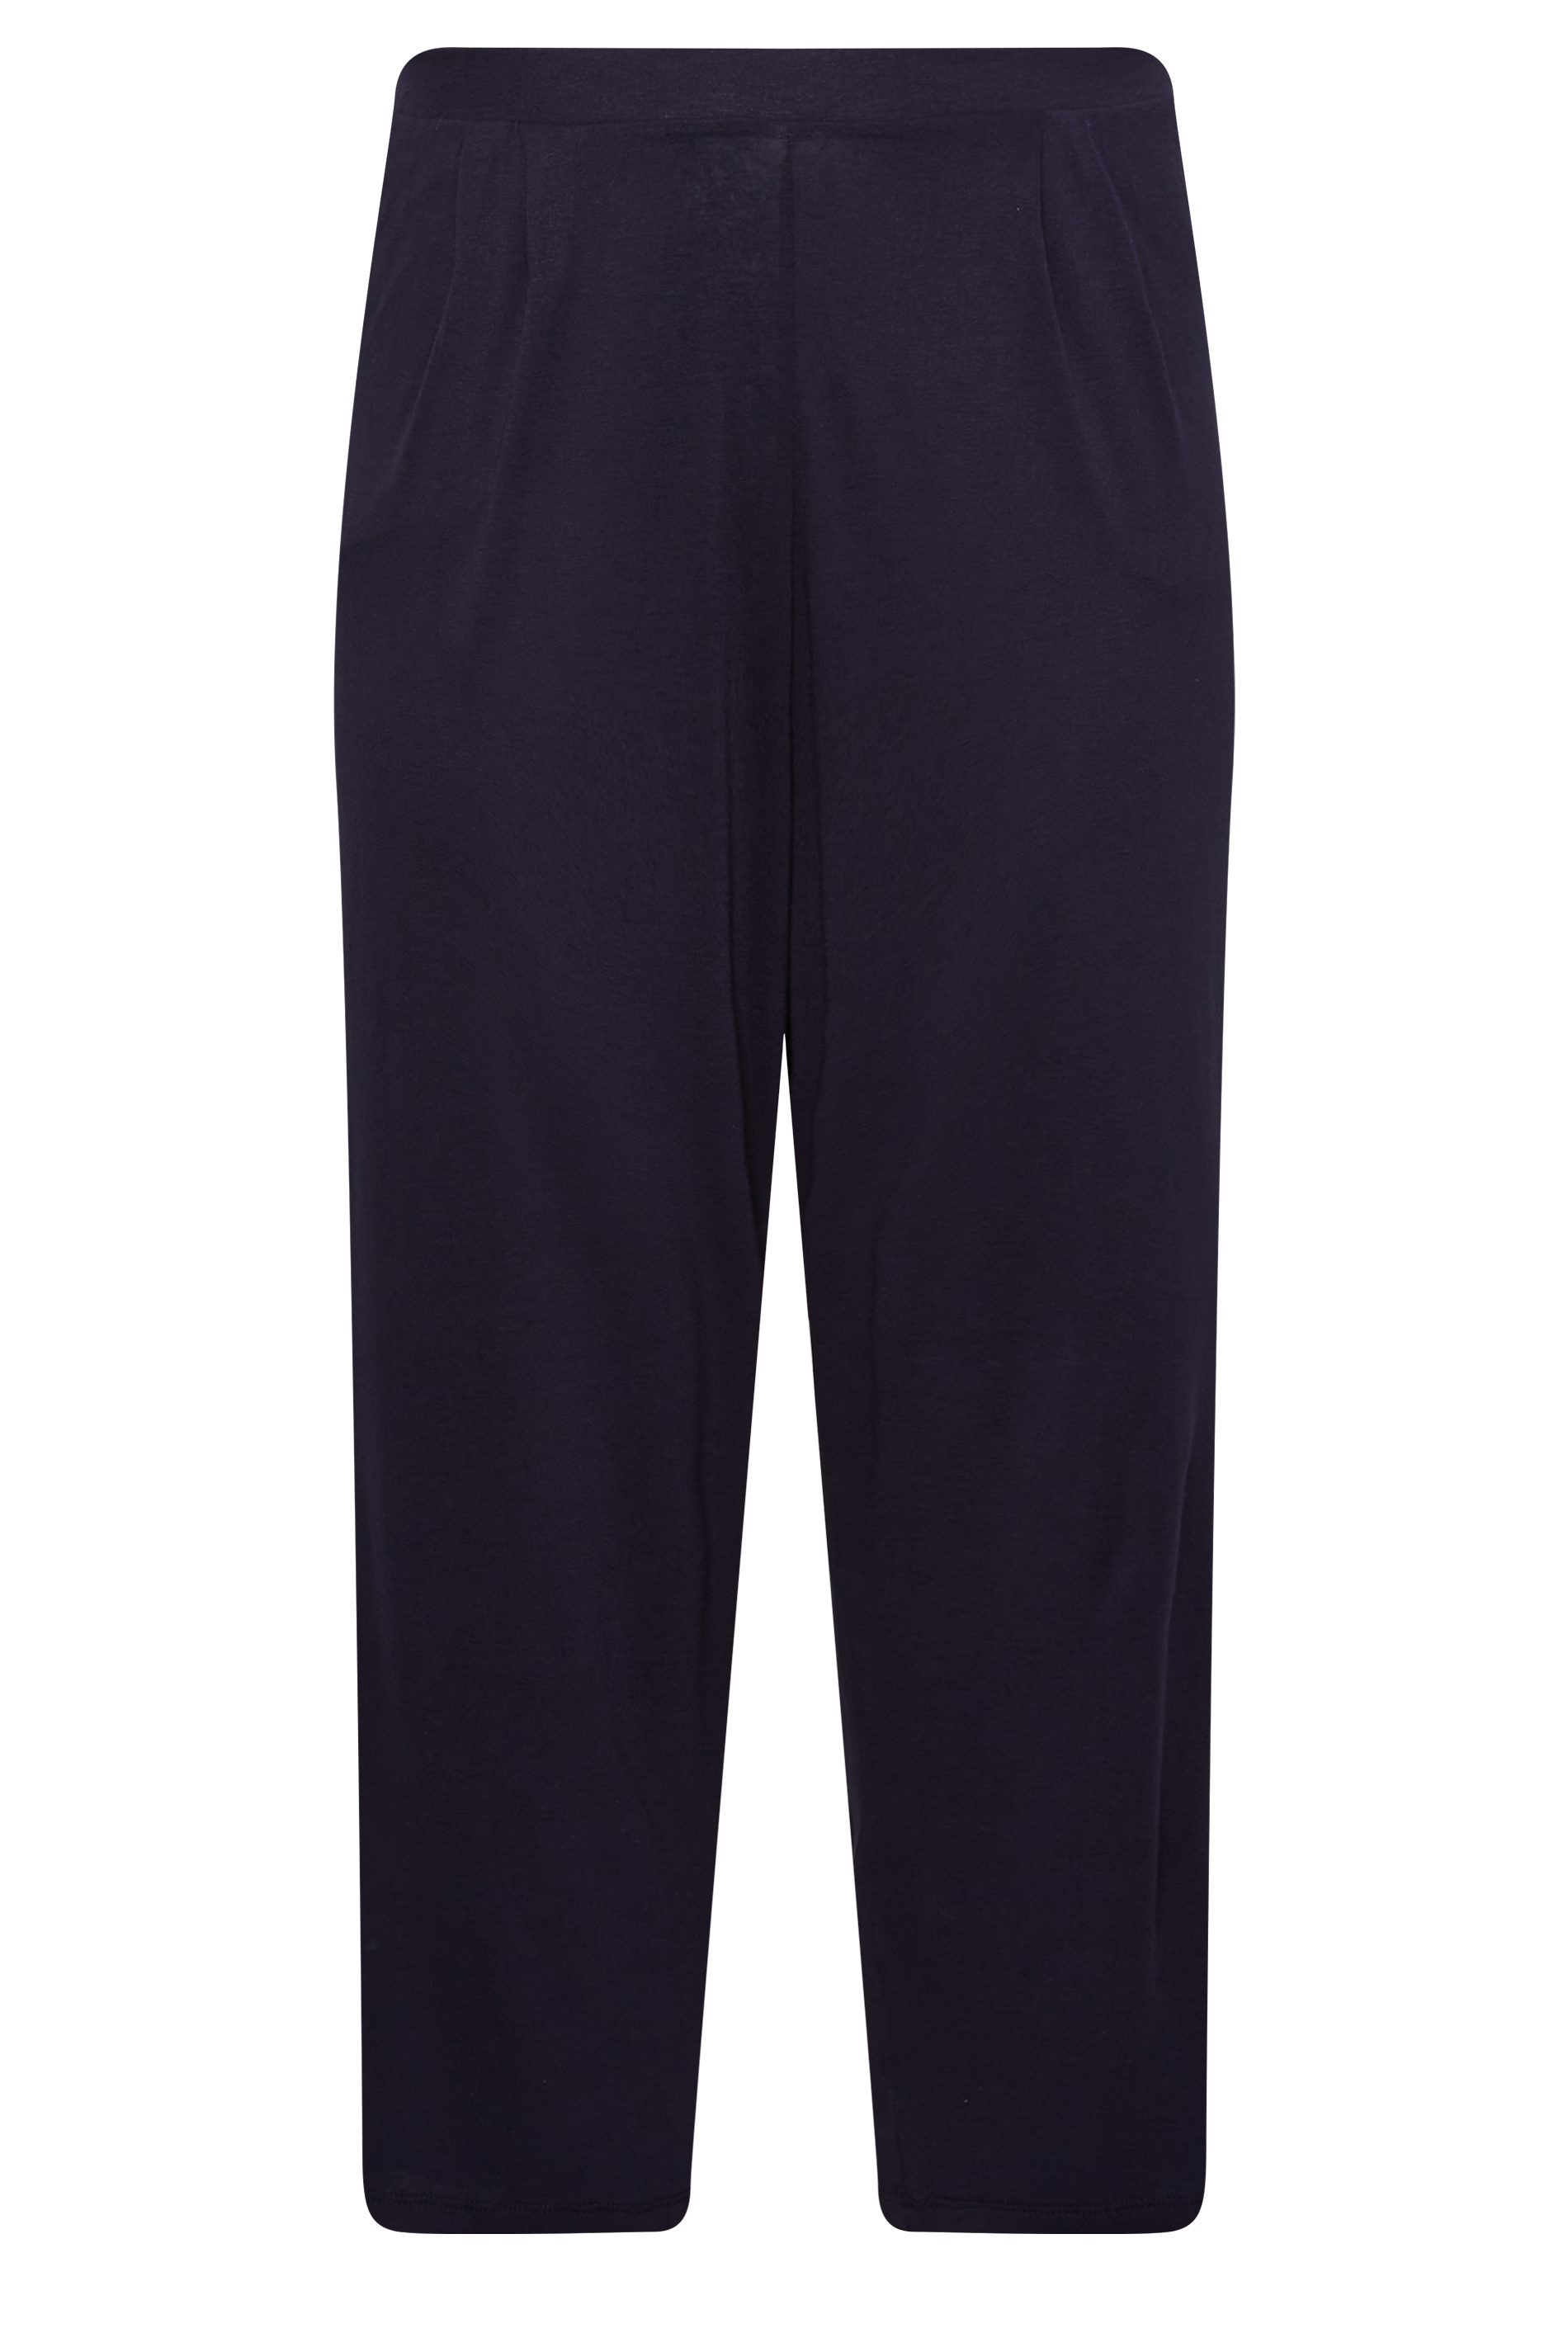 Cotton trousers by Gucci | Tessabit